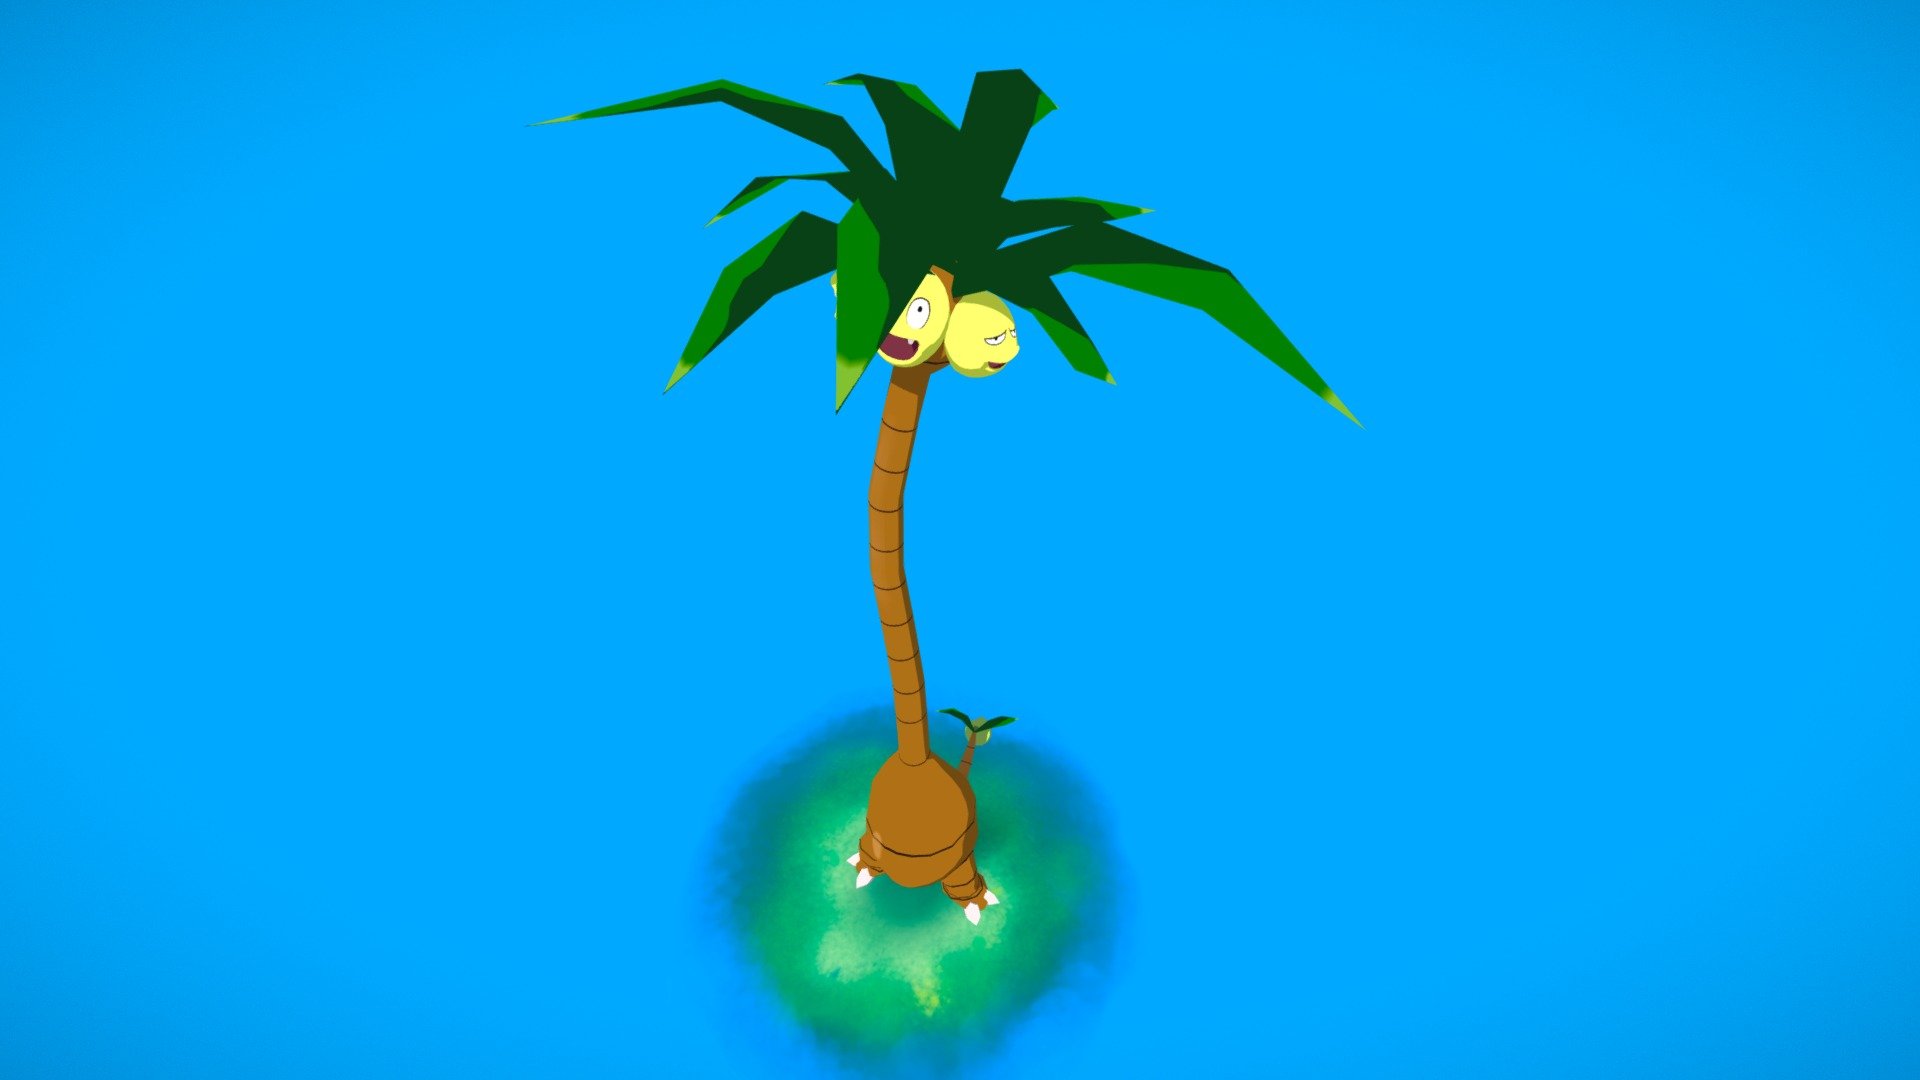 Pokémon Sun &amp; Moon arrives this week, to celebrate I modeled this silly alolan Exeggutor! If you are interested you can get my models here.  This is a fanmade model, Pokémon is a trademark owned by its respective owners 3d model